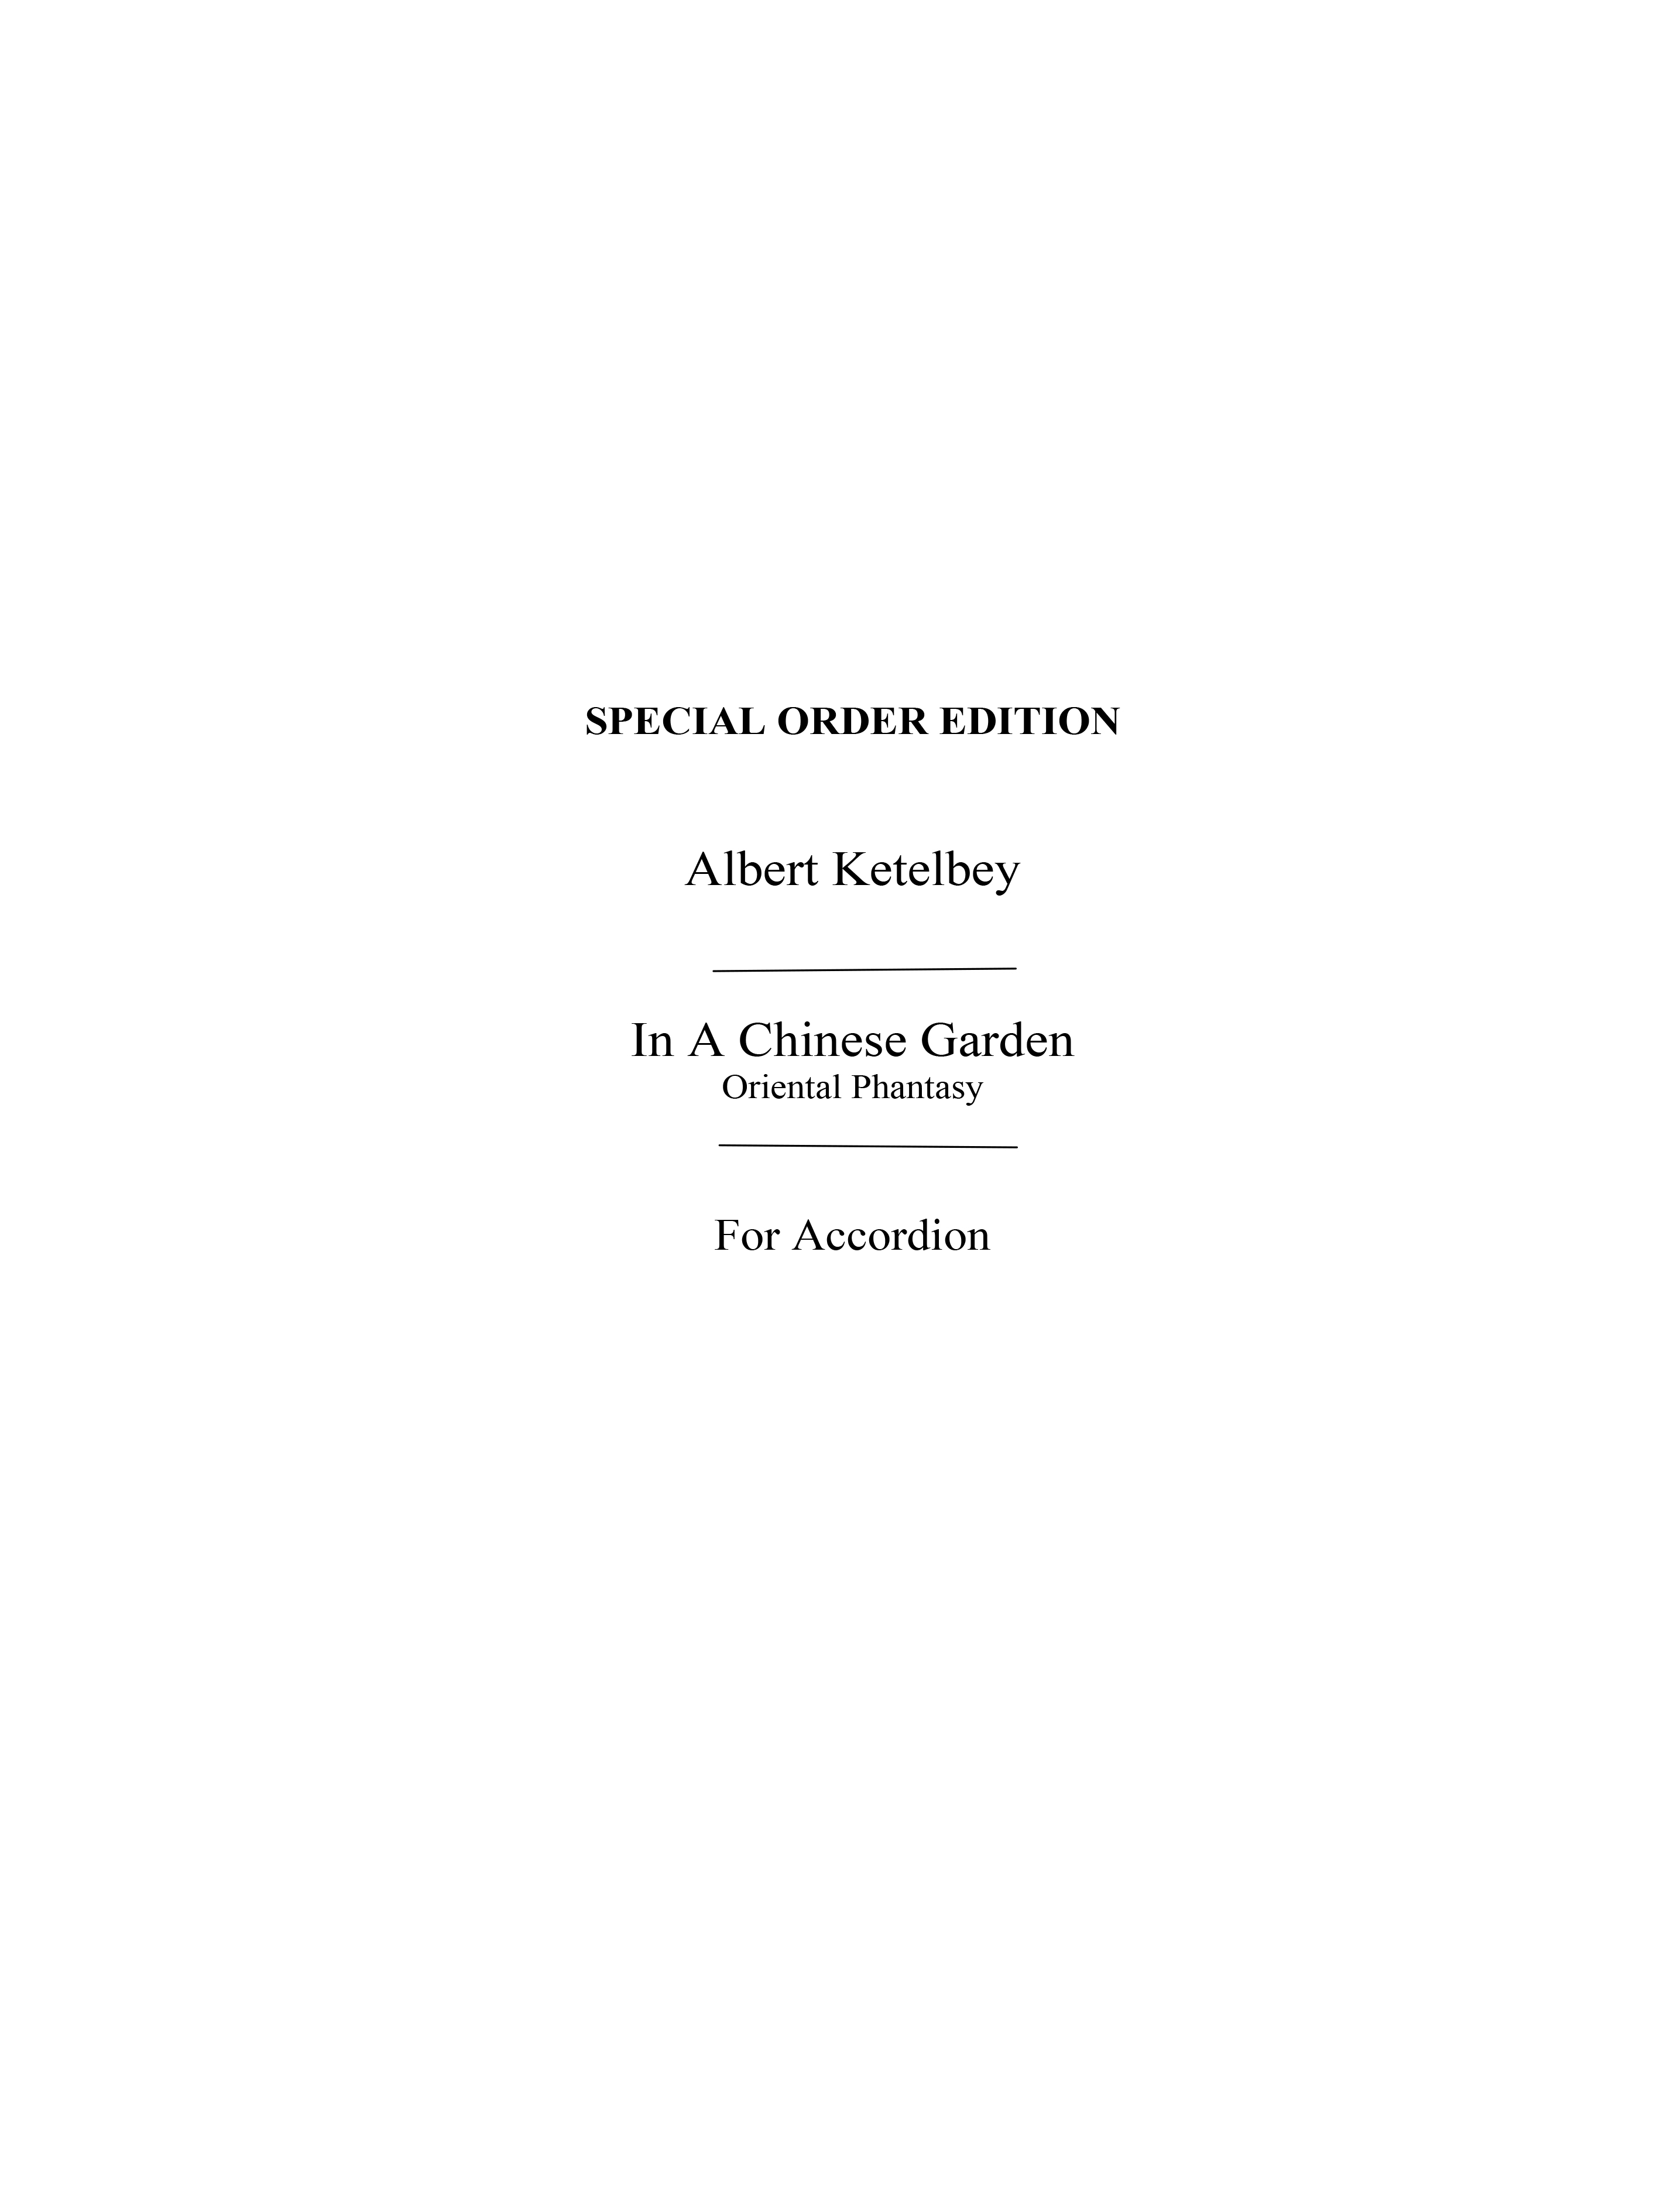 Albert Ketelbey: In A Chinese Temple Garden (Accordion Solo)